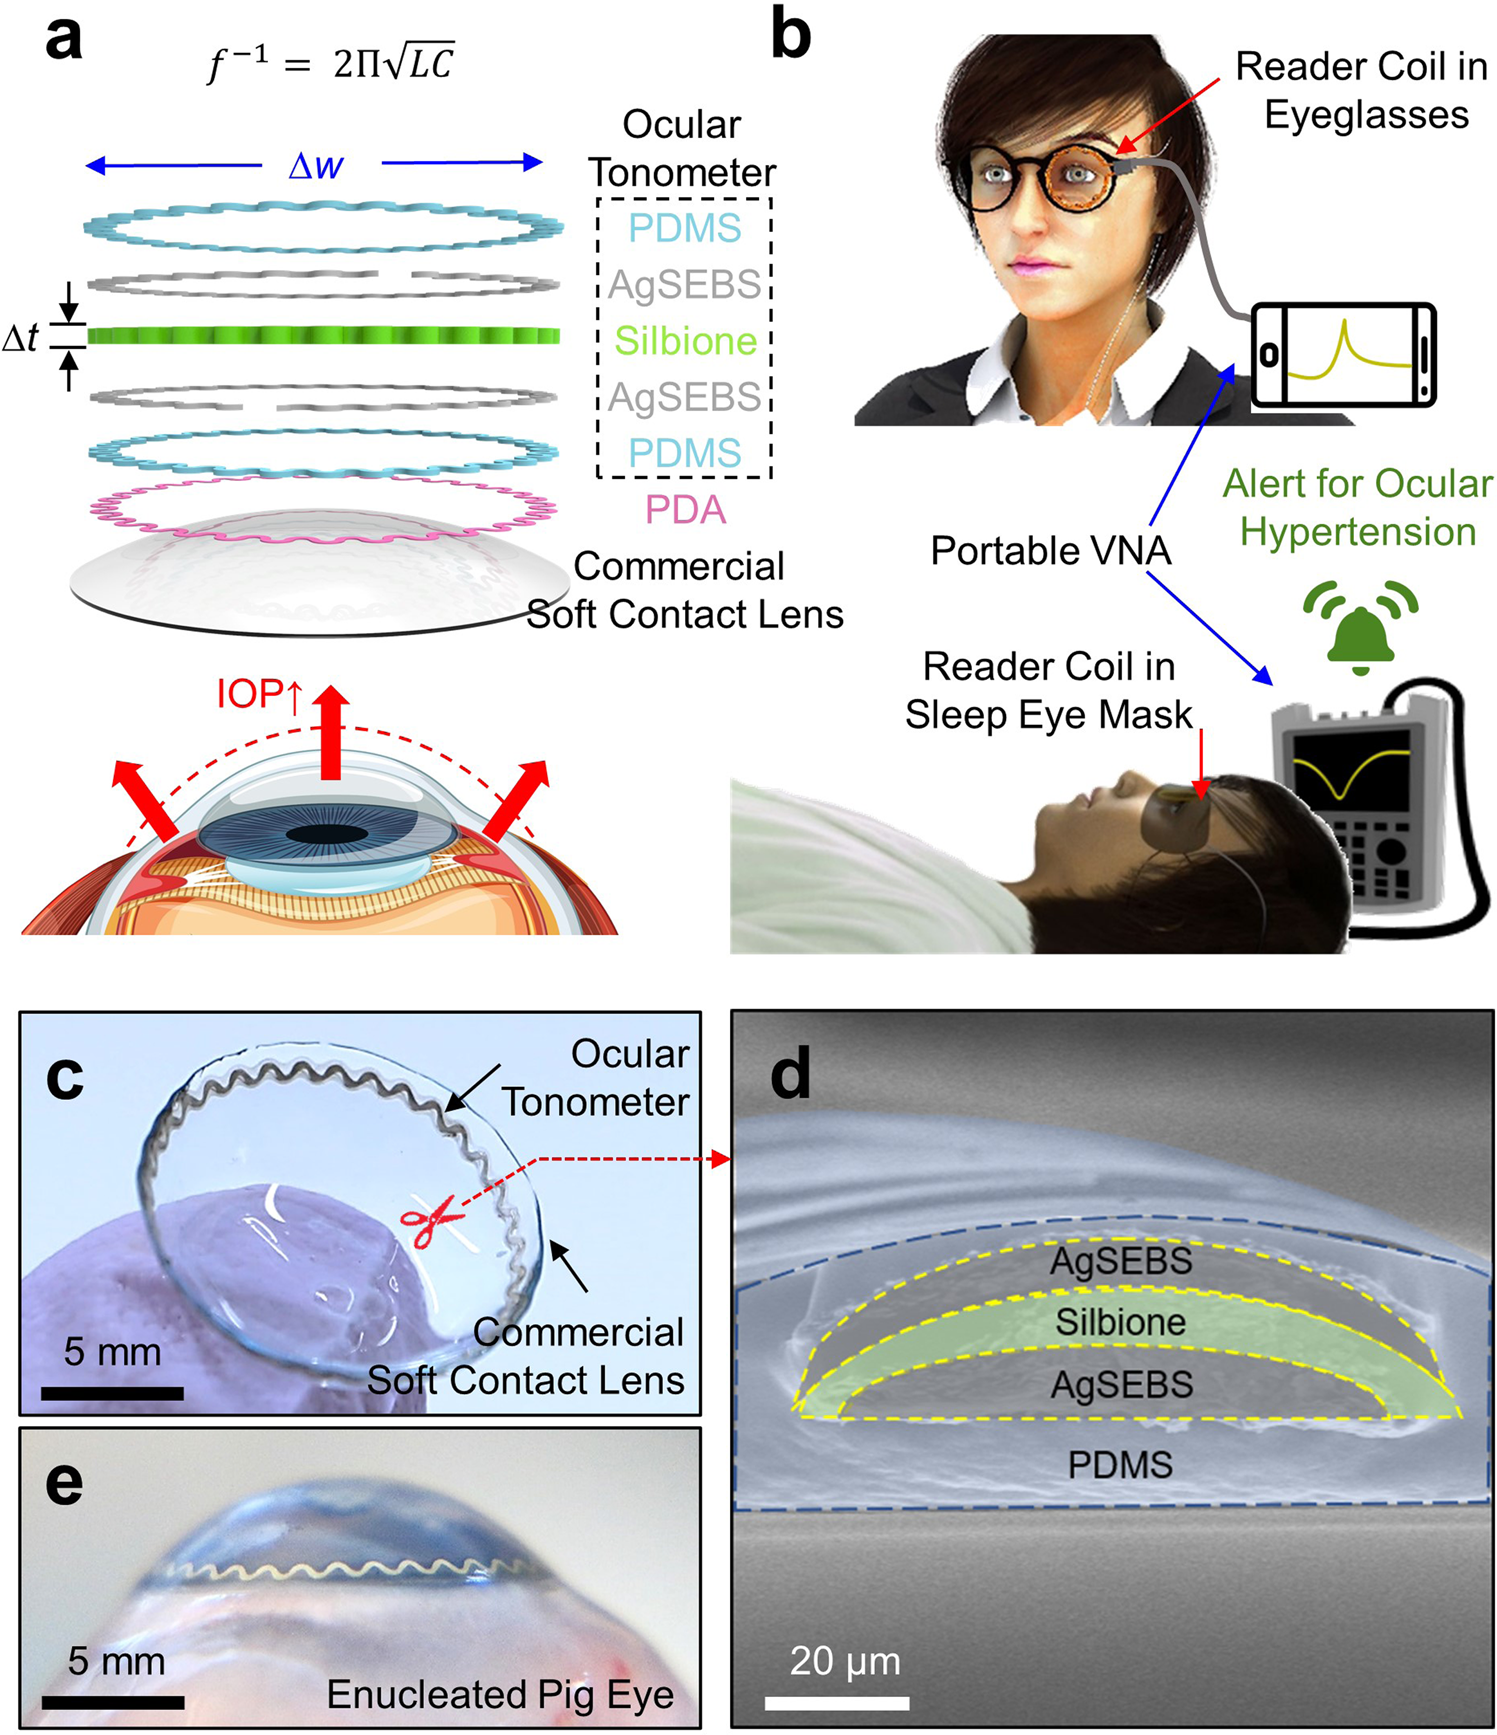 begin ethiek Tandheelkundig Smart soft contact lenses for continuous 24-hour monitoring of intraocular  pressure in glaucoma care | Nature Communications